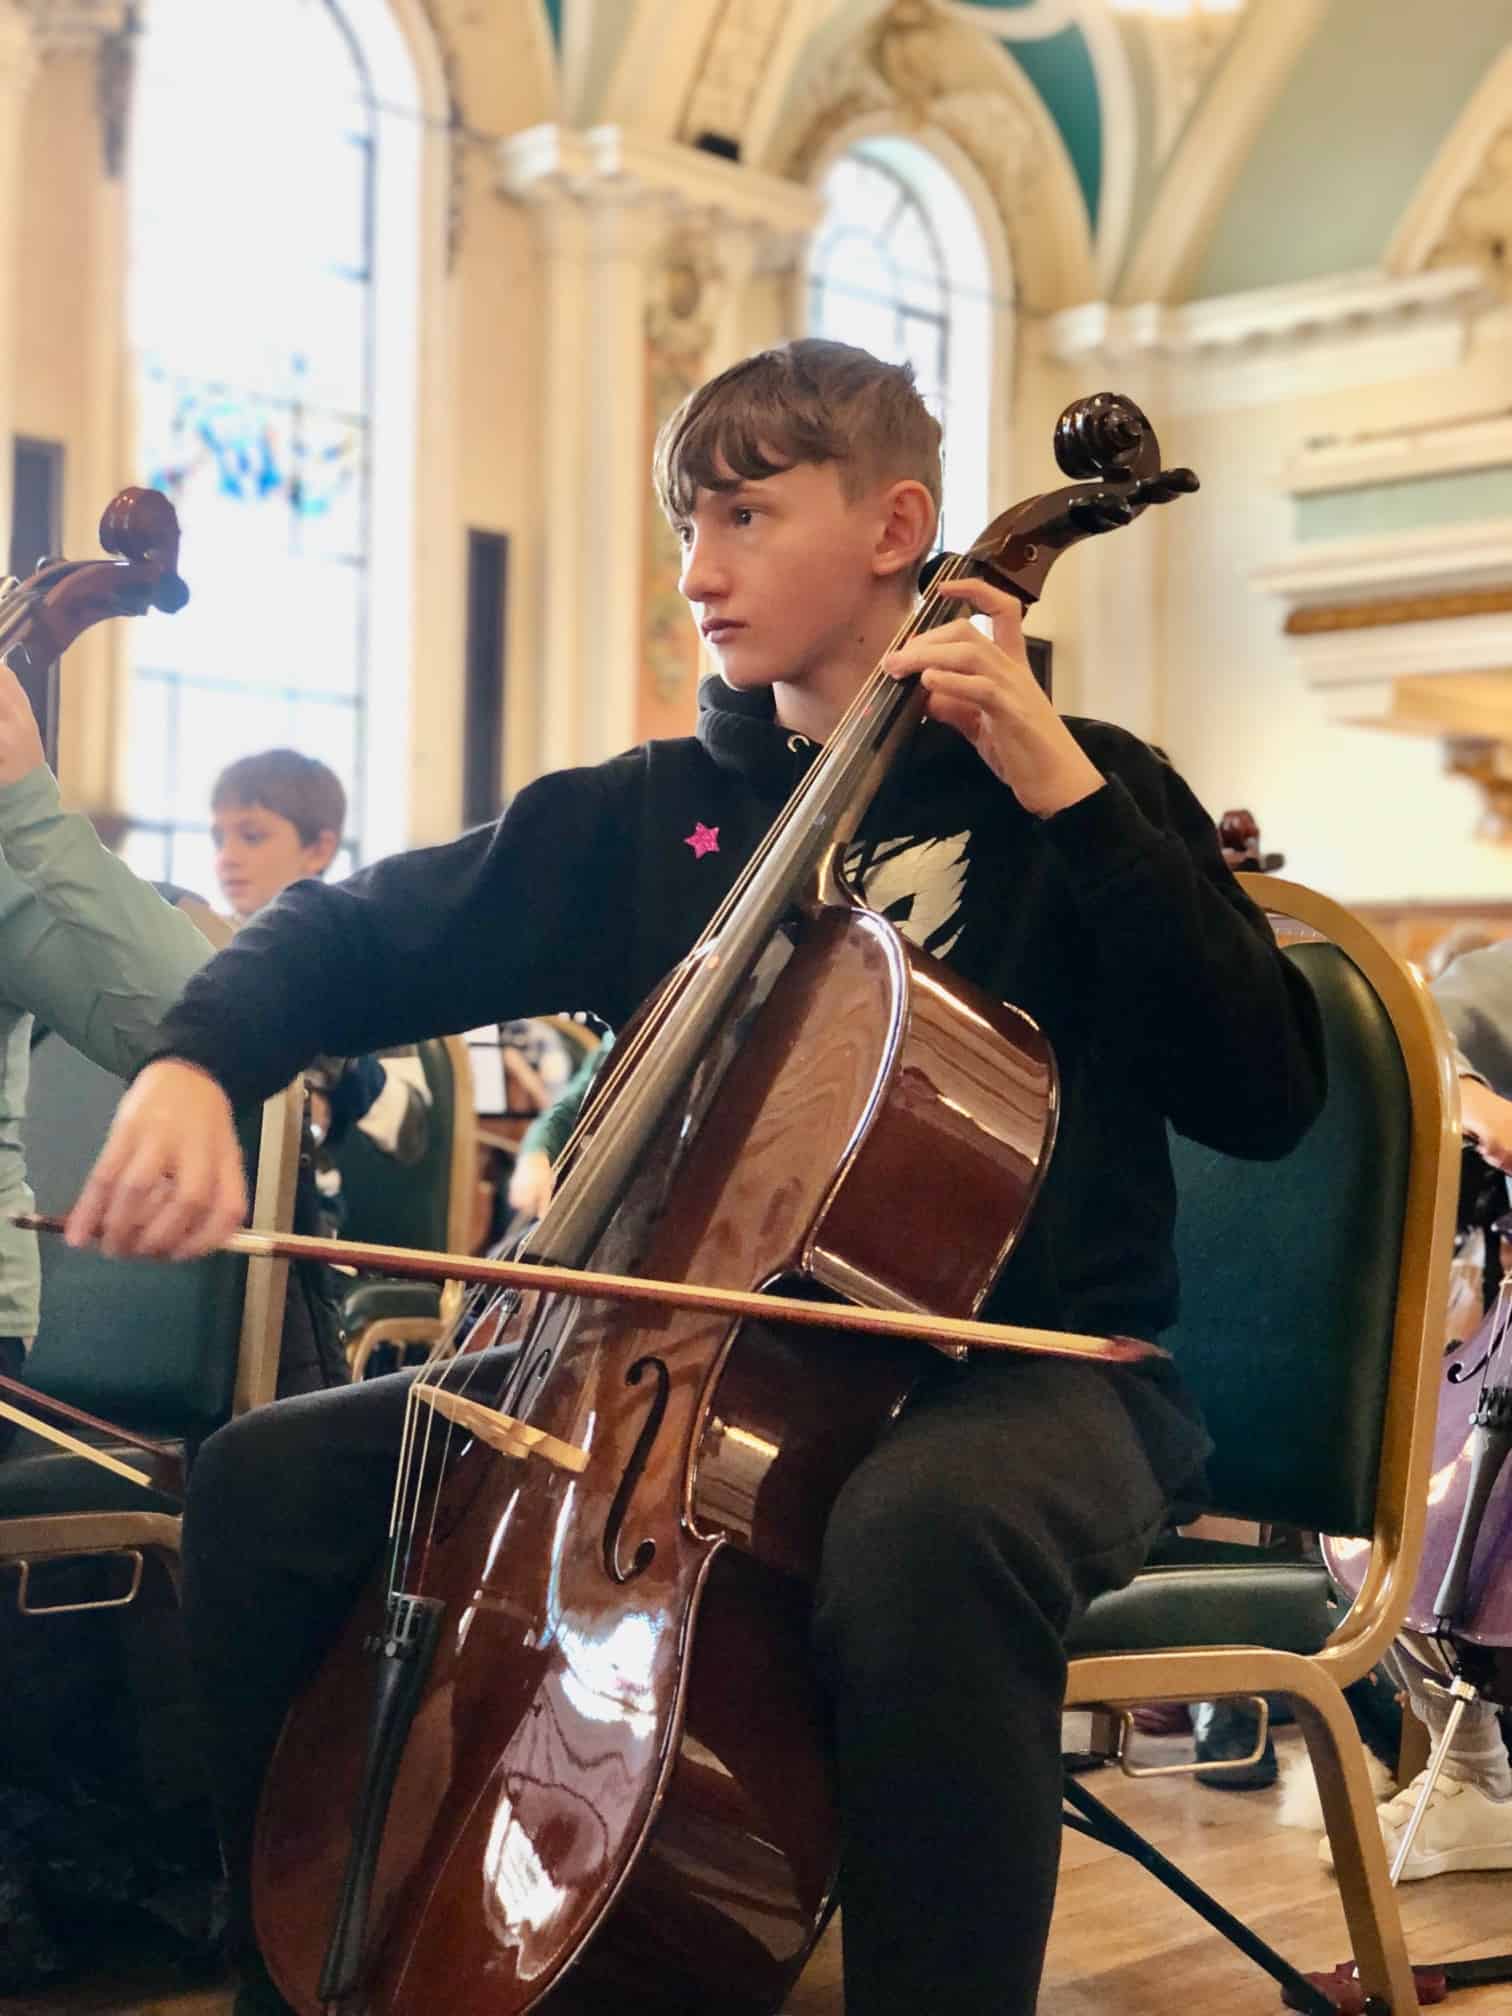 A student from Laurus Cheadle Hulme plays a string instrument at the Benedetti Strings day at Stockport Town Hall.